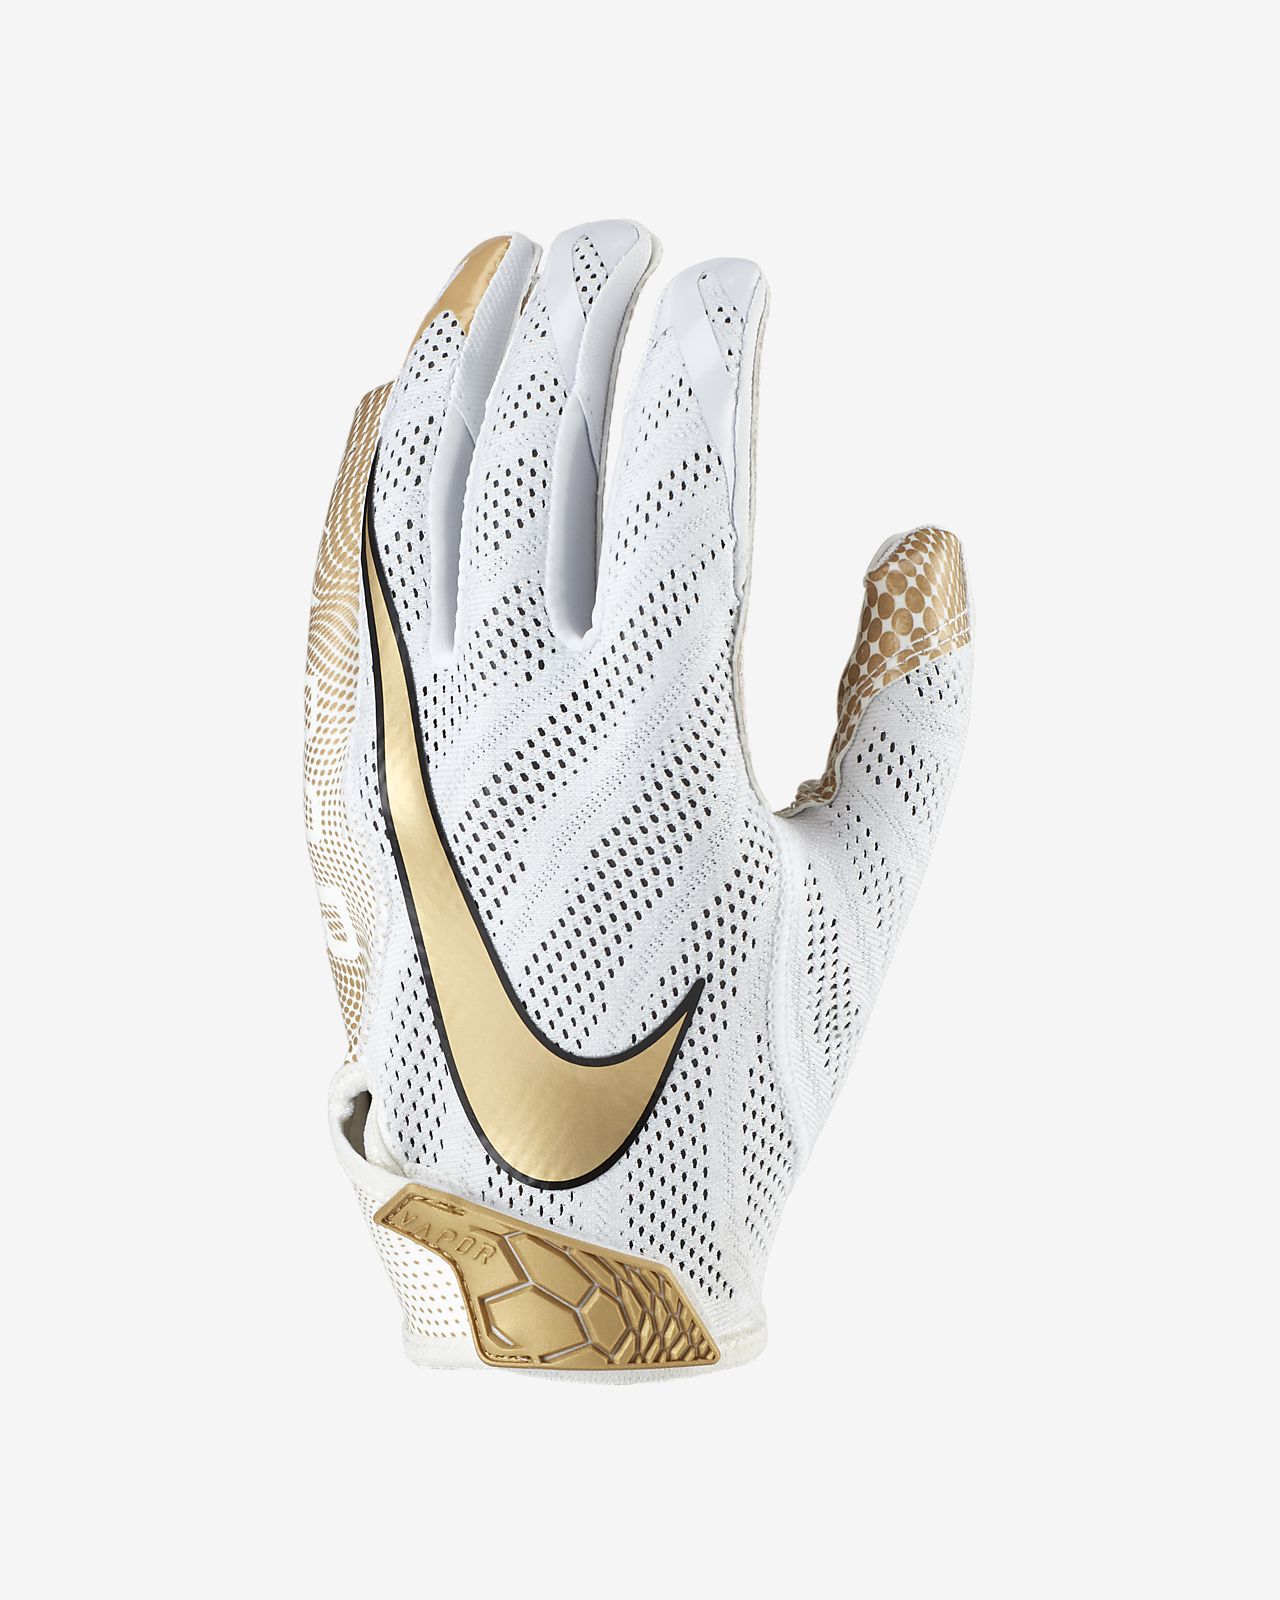 white and gold nike football gloves